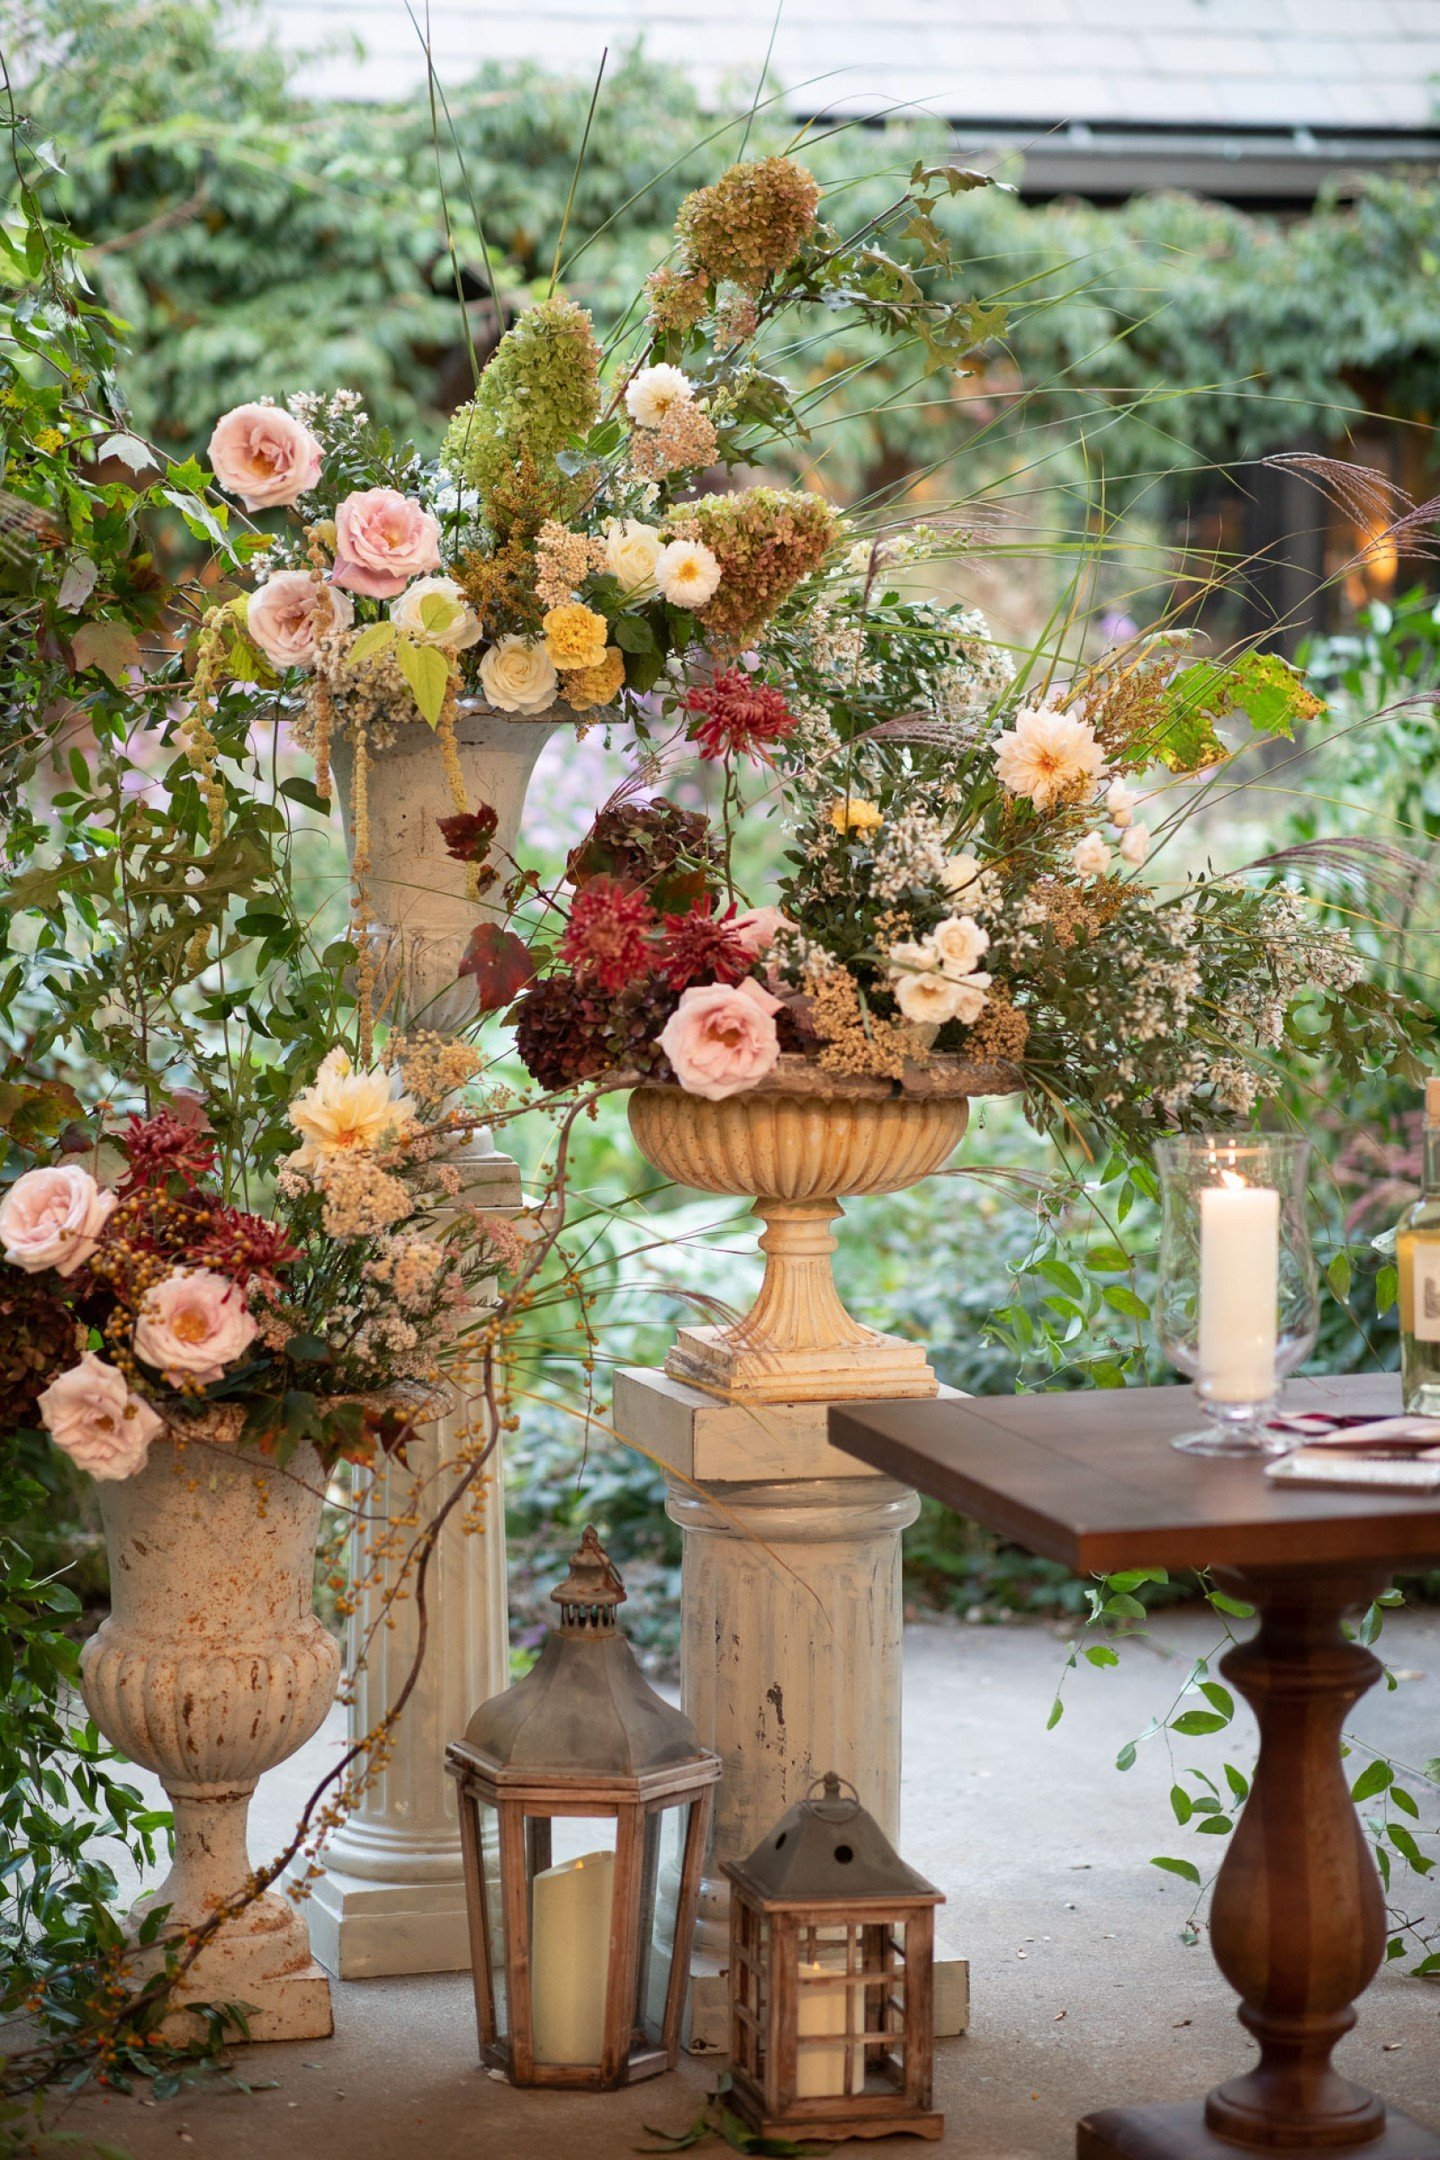 This bride chose a garden inspired look for her altar. How stunning is this set up?!